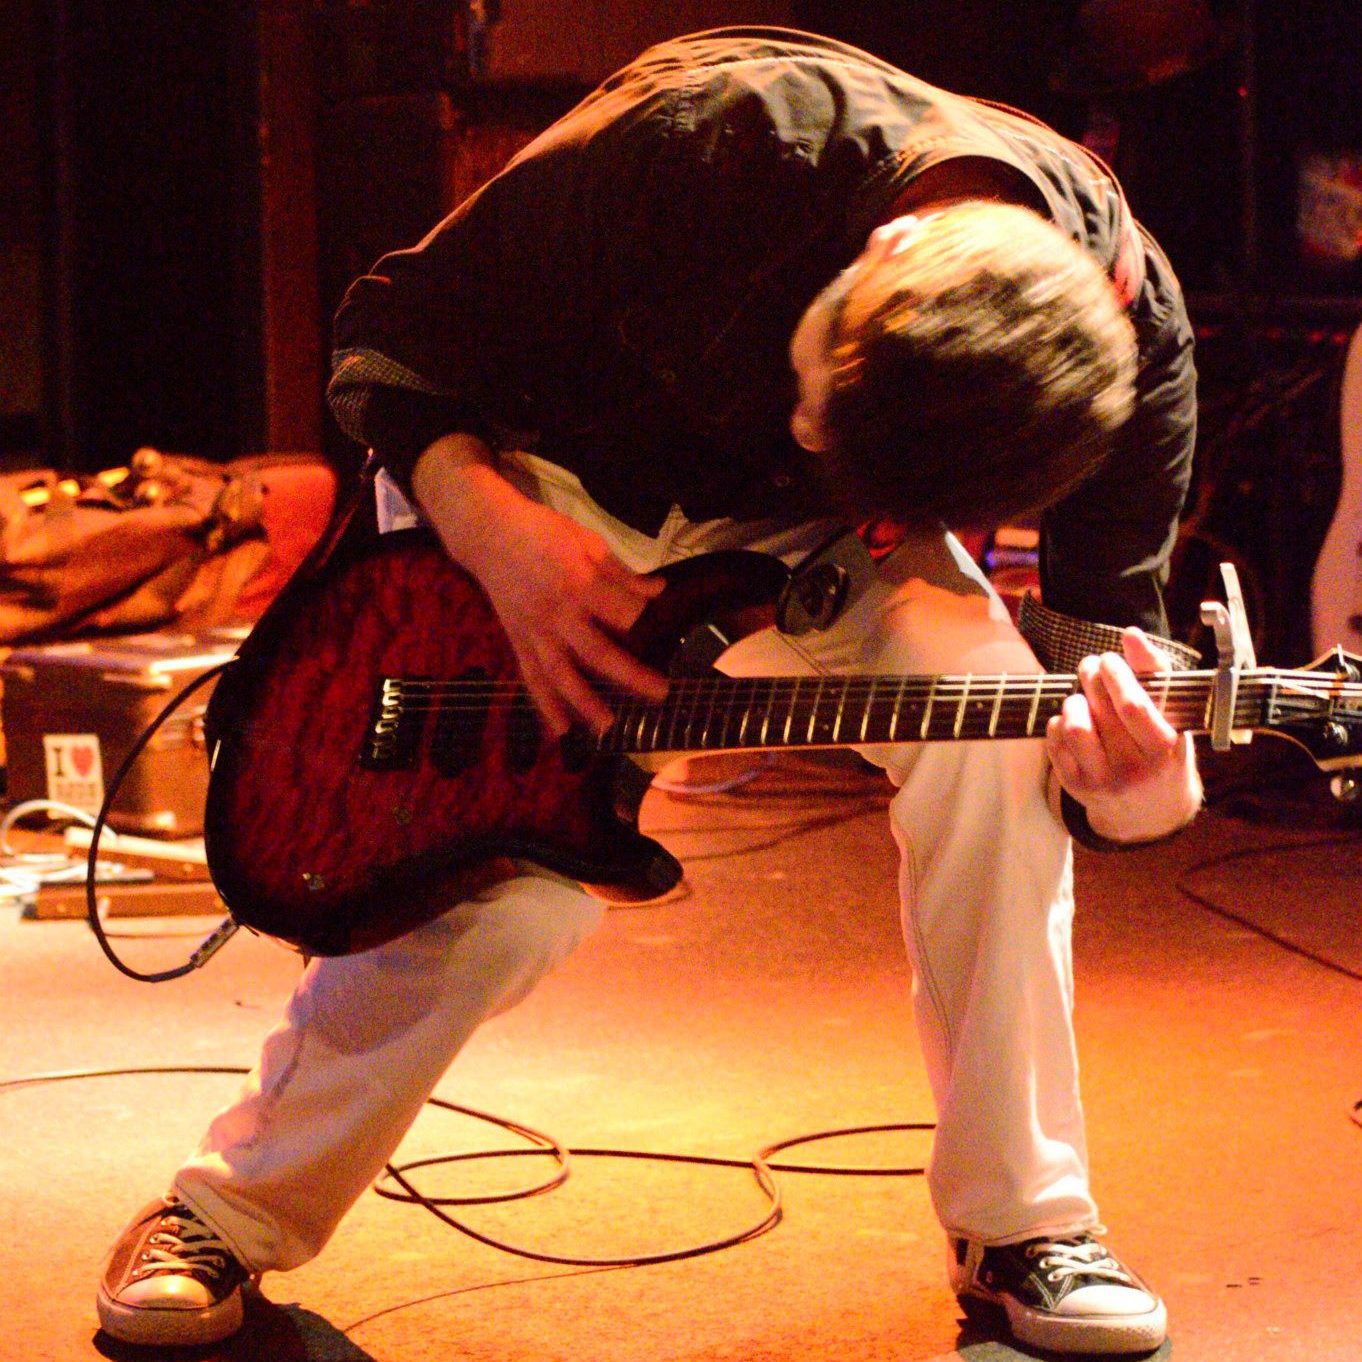 An image of Bryce Kalal, a white man with a black shirt and white pants, hunched over as he plays a red guitar on stage.